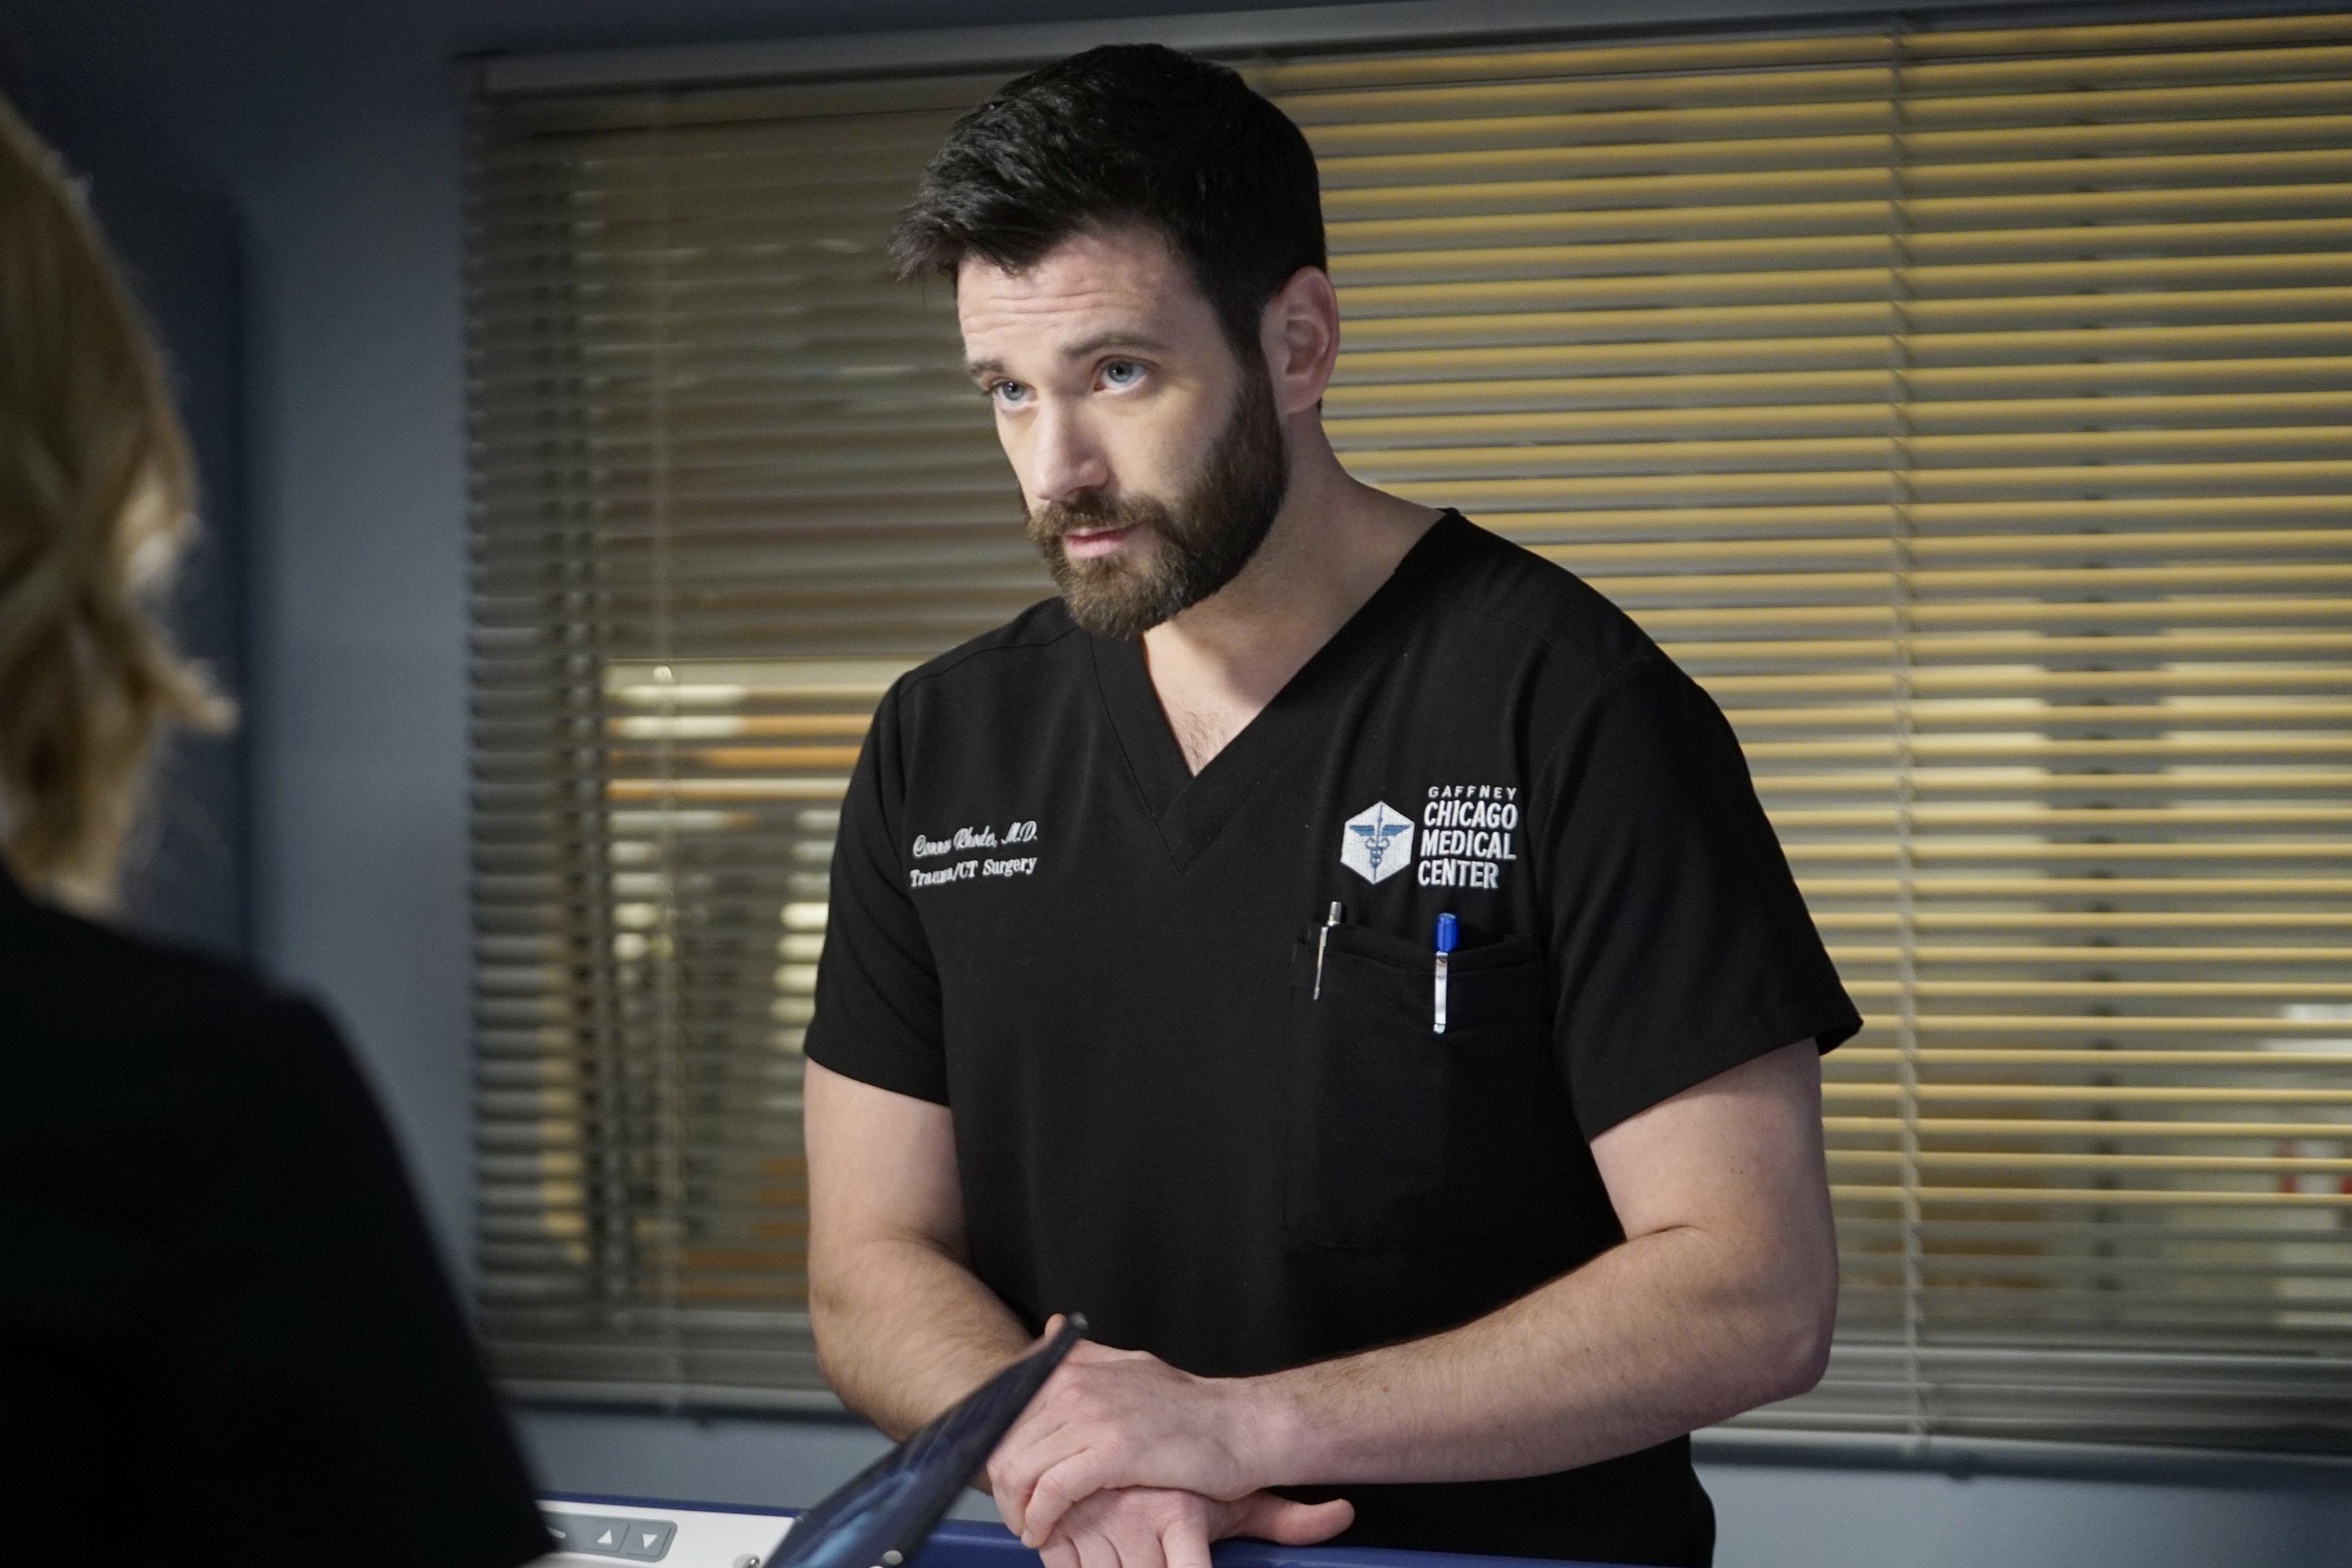 Dr Rhodes Chicago Med Chicago Med star Colin Donnell confirms exit from series, as two more  Chicago stars leave too